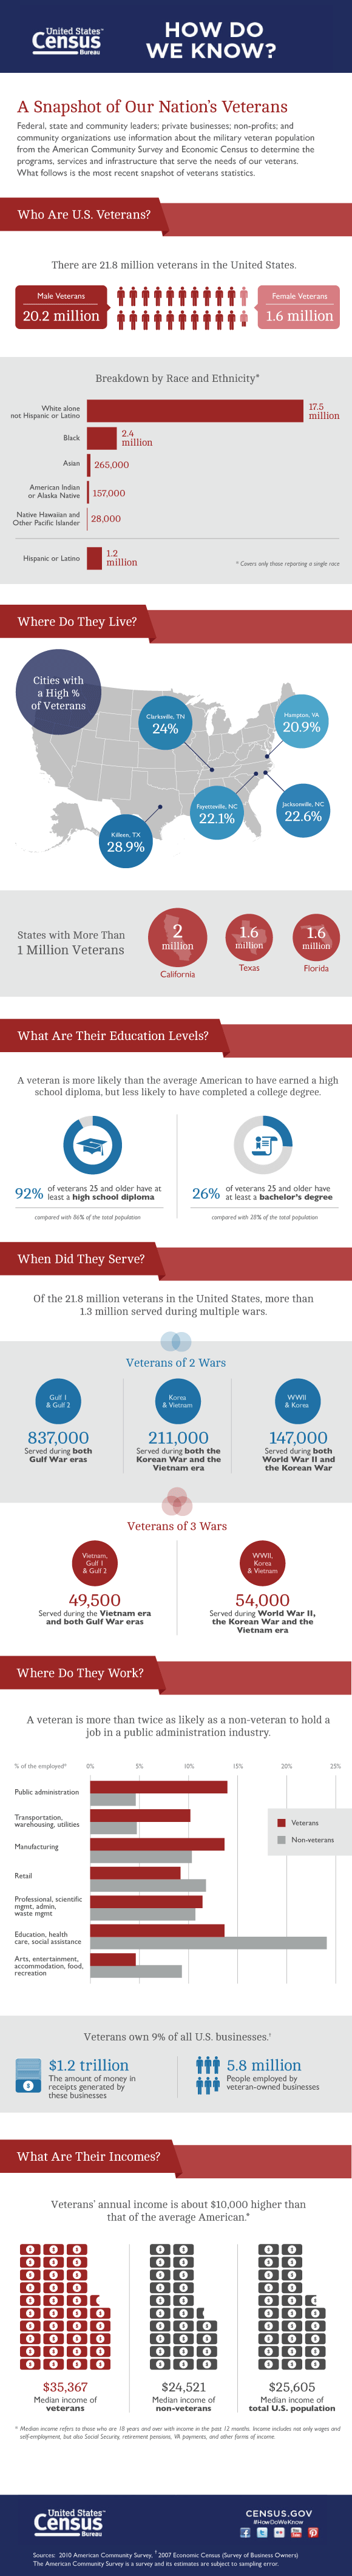 A Snapshot of Our Nation's Veterans infographic image